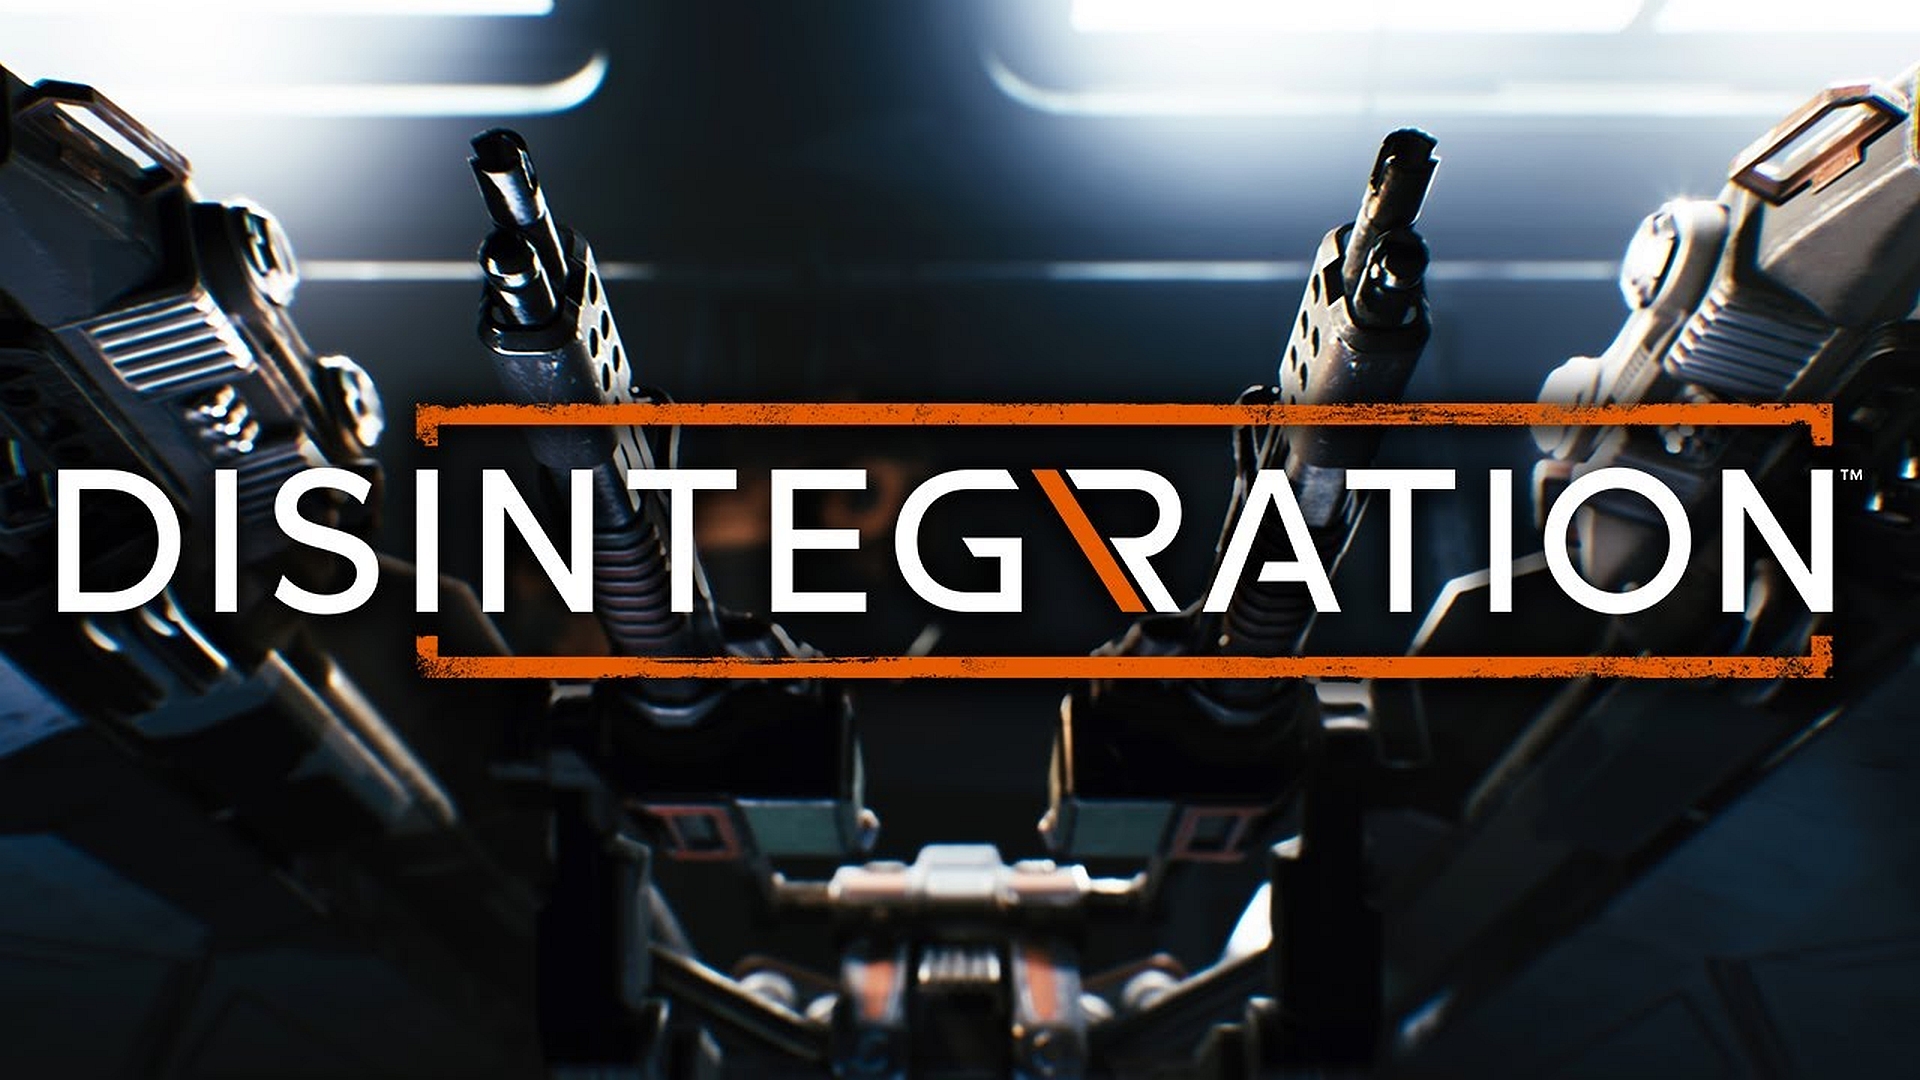 First Details Of Disintegration Revealed, New Game From The Creator Of Halo